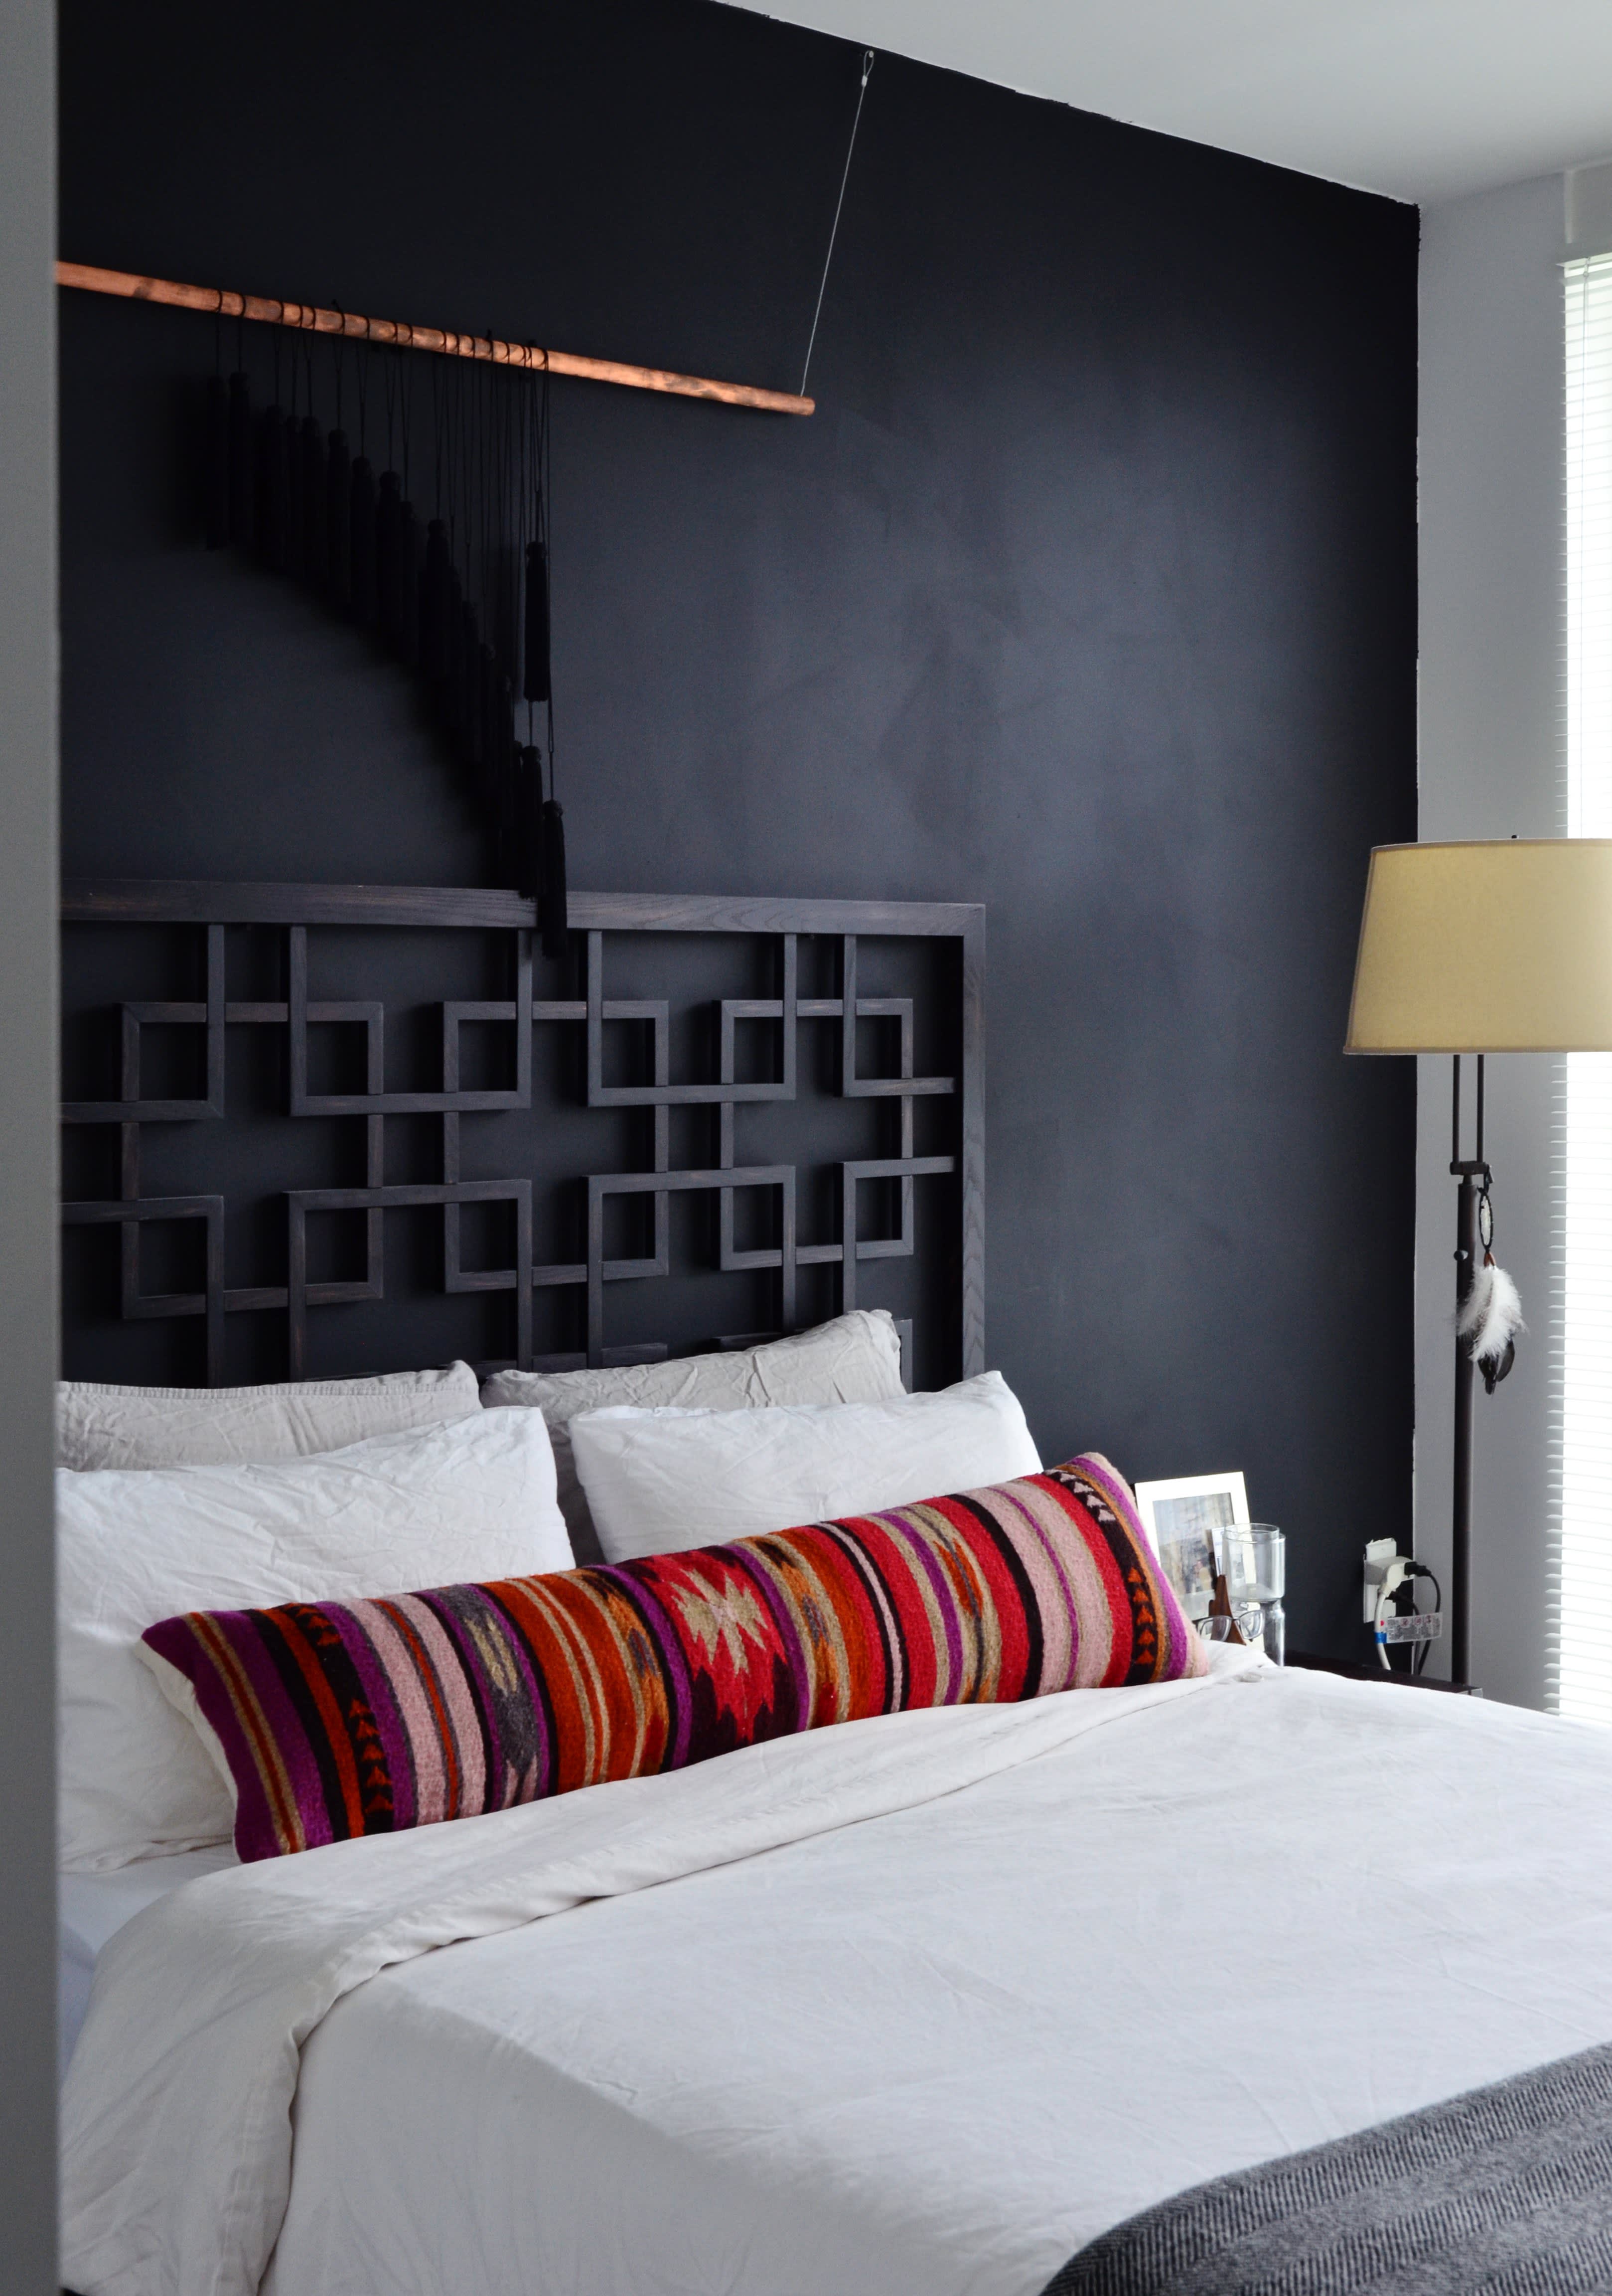 Black wall painted rooms: 8 Ideal Interiors with Black Walls |